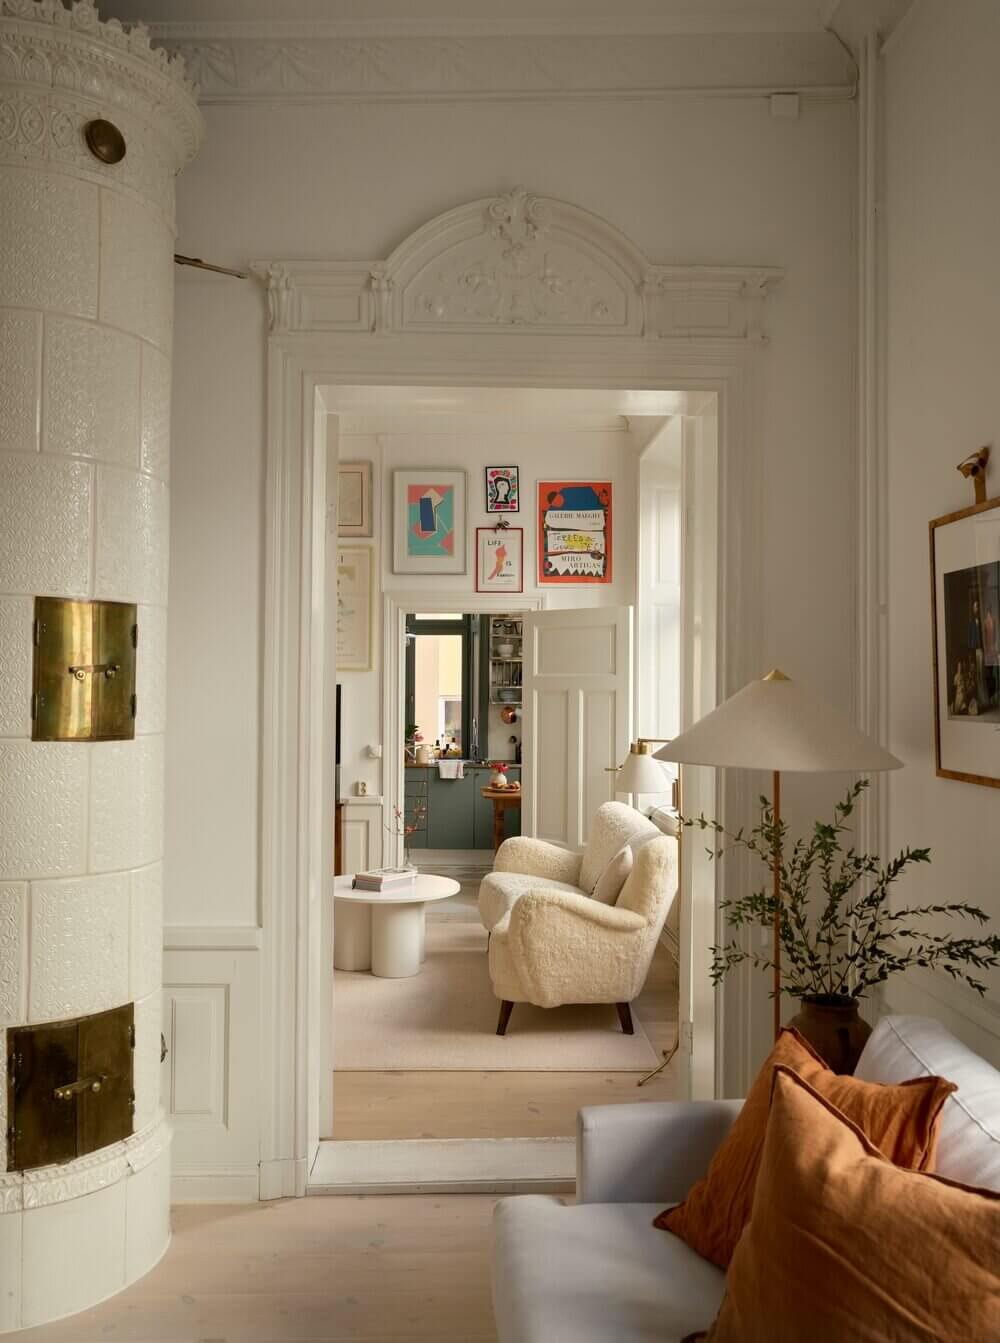 ACombinationofStylesInAHistoricStockholmApartment TheNordroom10 A Combination of Styles In A Historic Stockholm Apartment